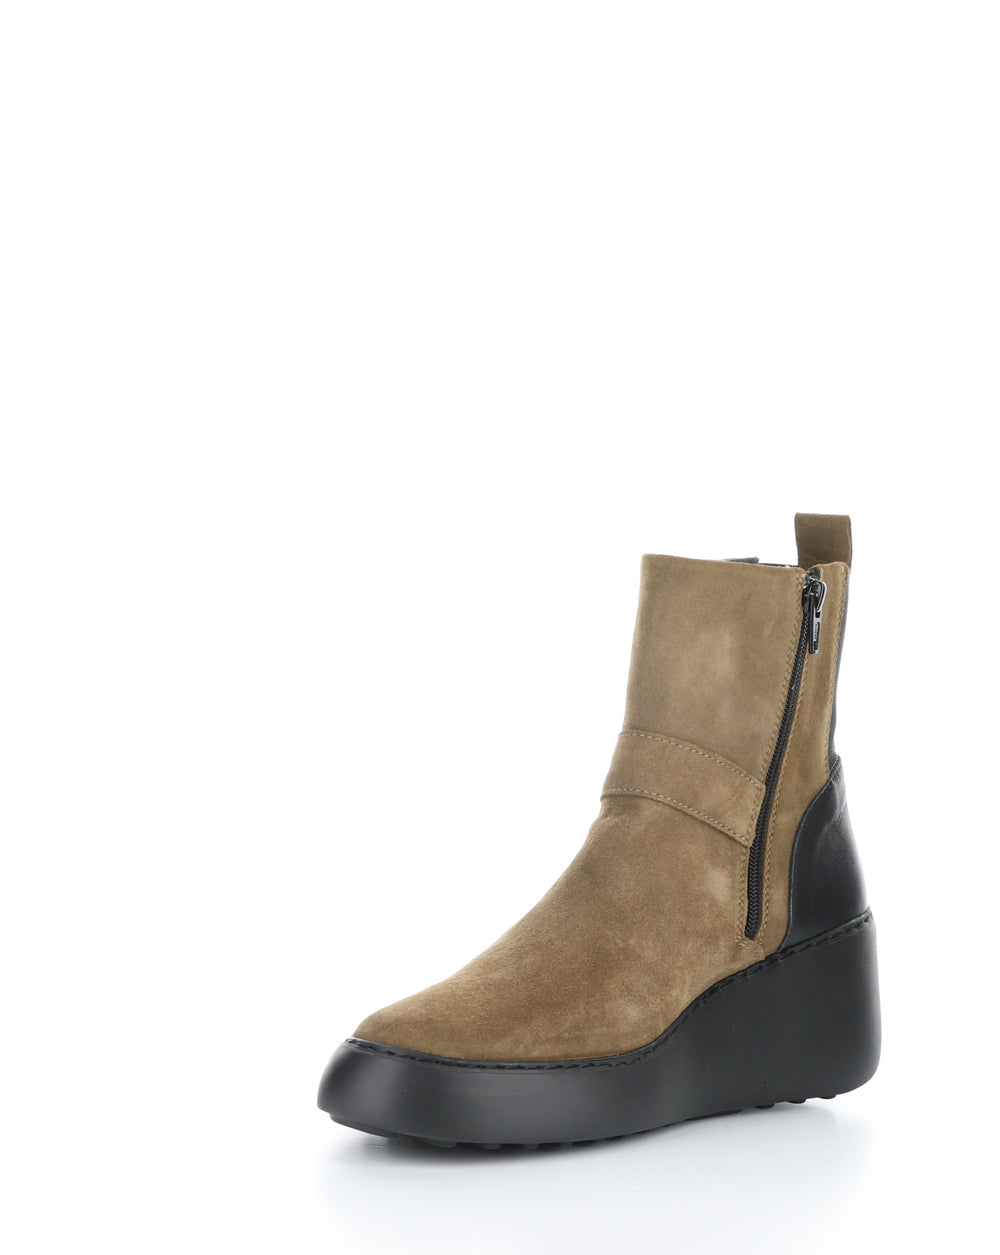 DOXE604FLY 002 TAUPE/BLACK Elasticated Boots